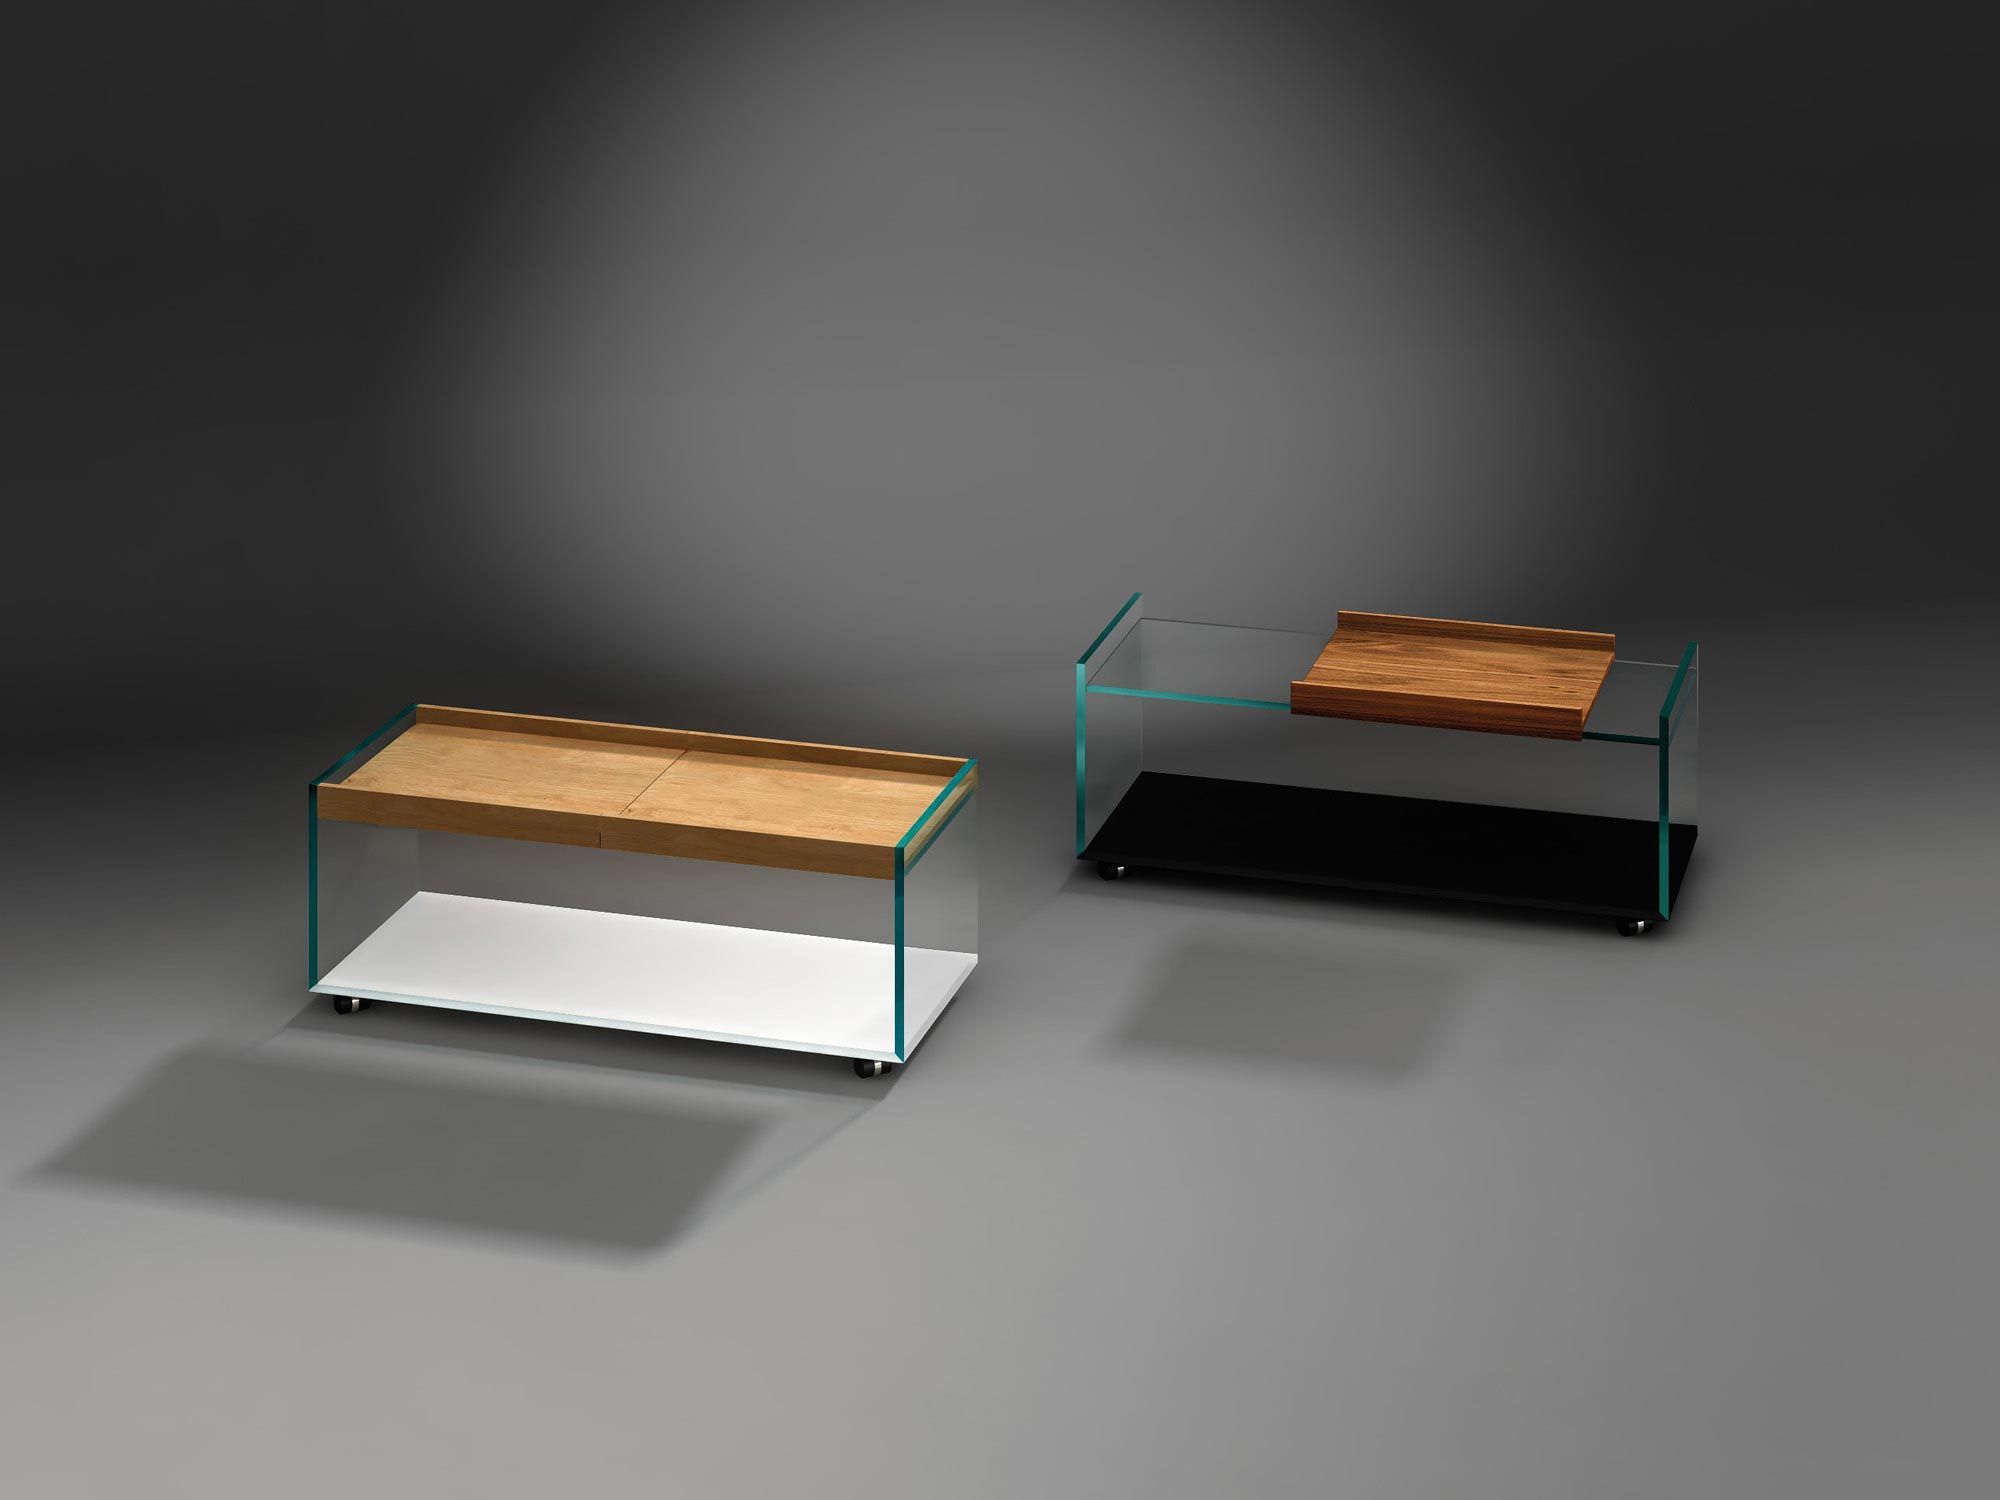 Buy Glass Coffee Table With Wooden Traydreieck Design | Tray Inside Detachable Tray Coffee Tables (View 14 of 15)